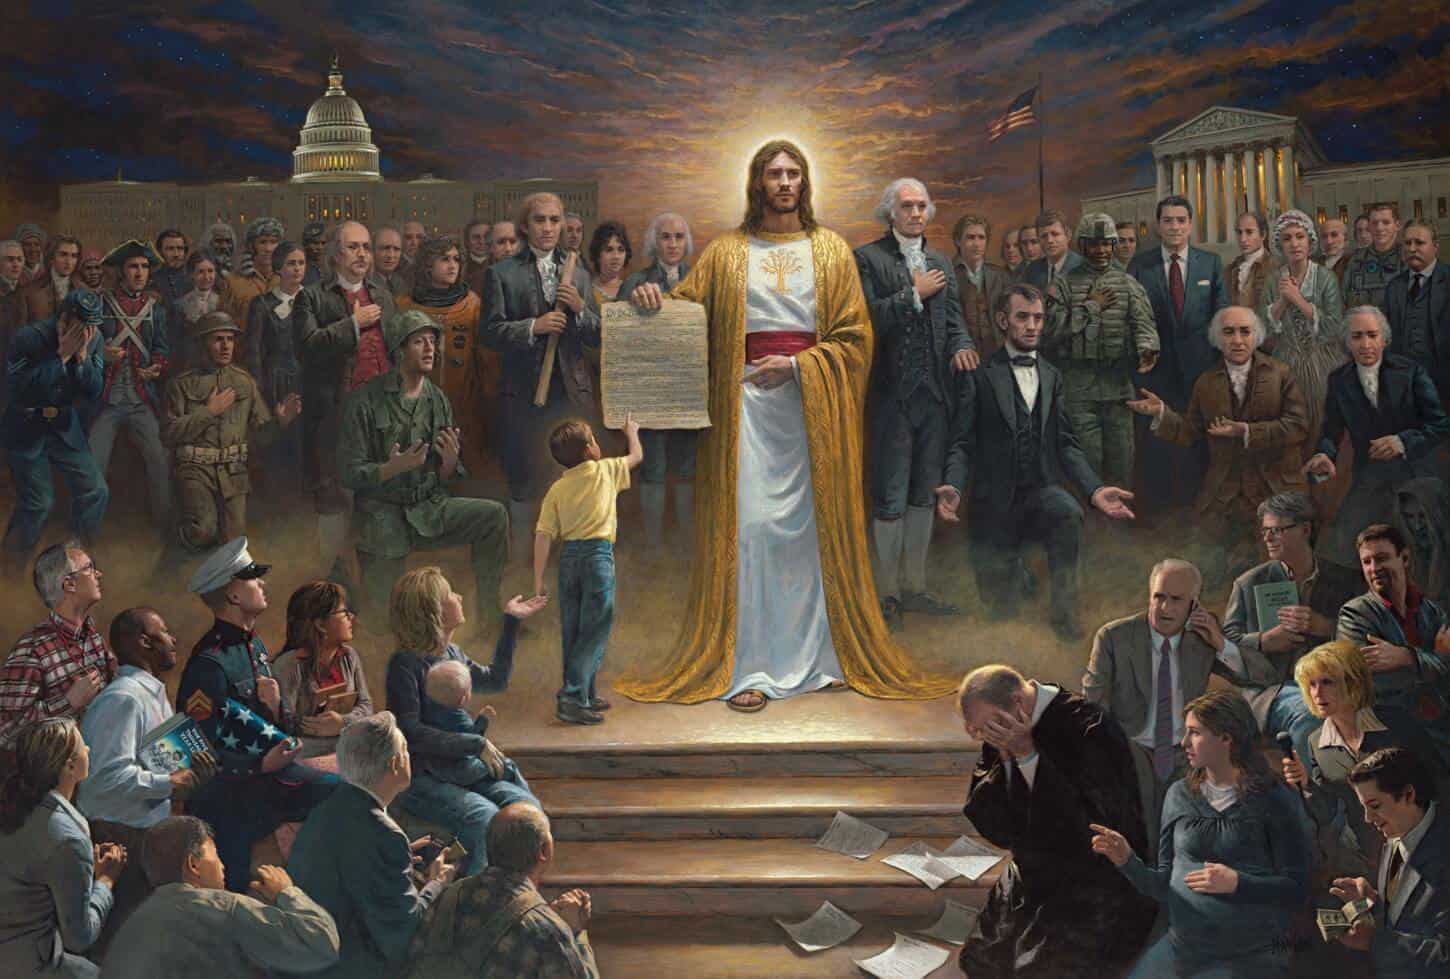 Jesus holding the constitutions by John McNaughton